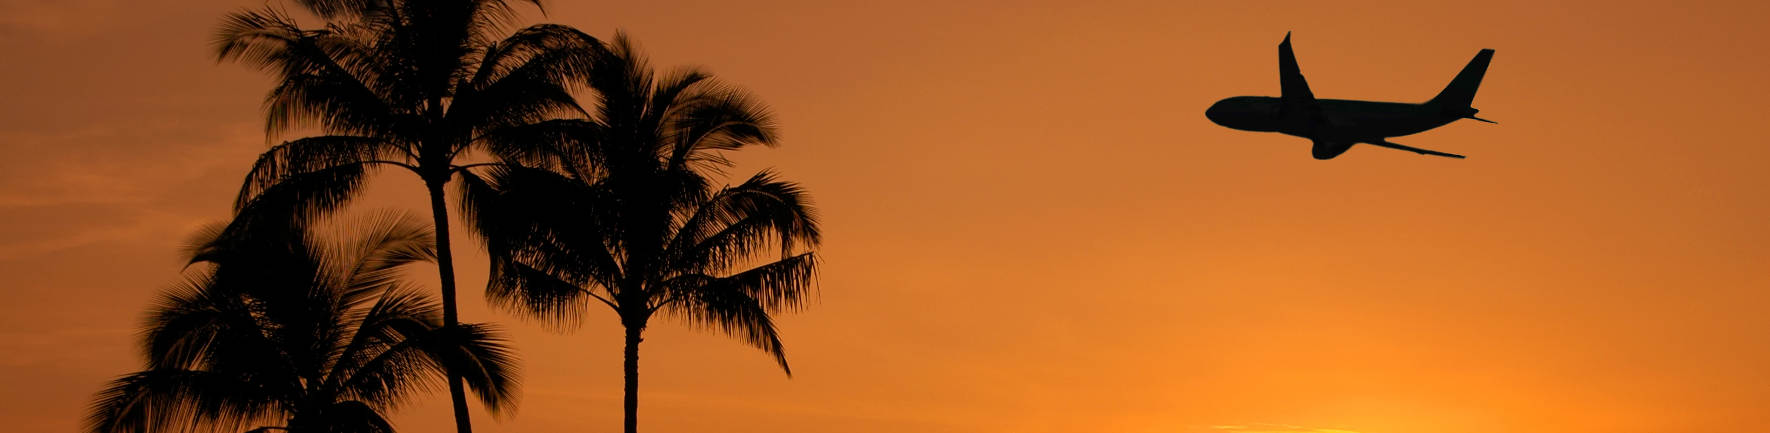 Orange colored sky with a silhouette of an airplane flying above with palm trees